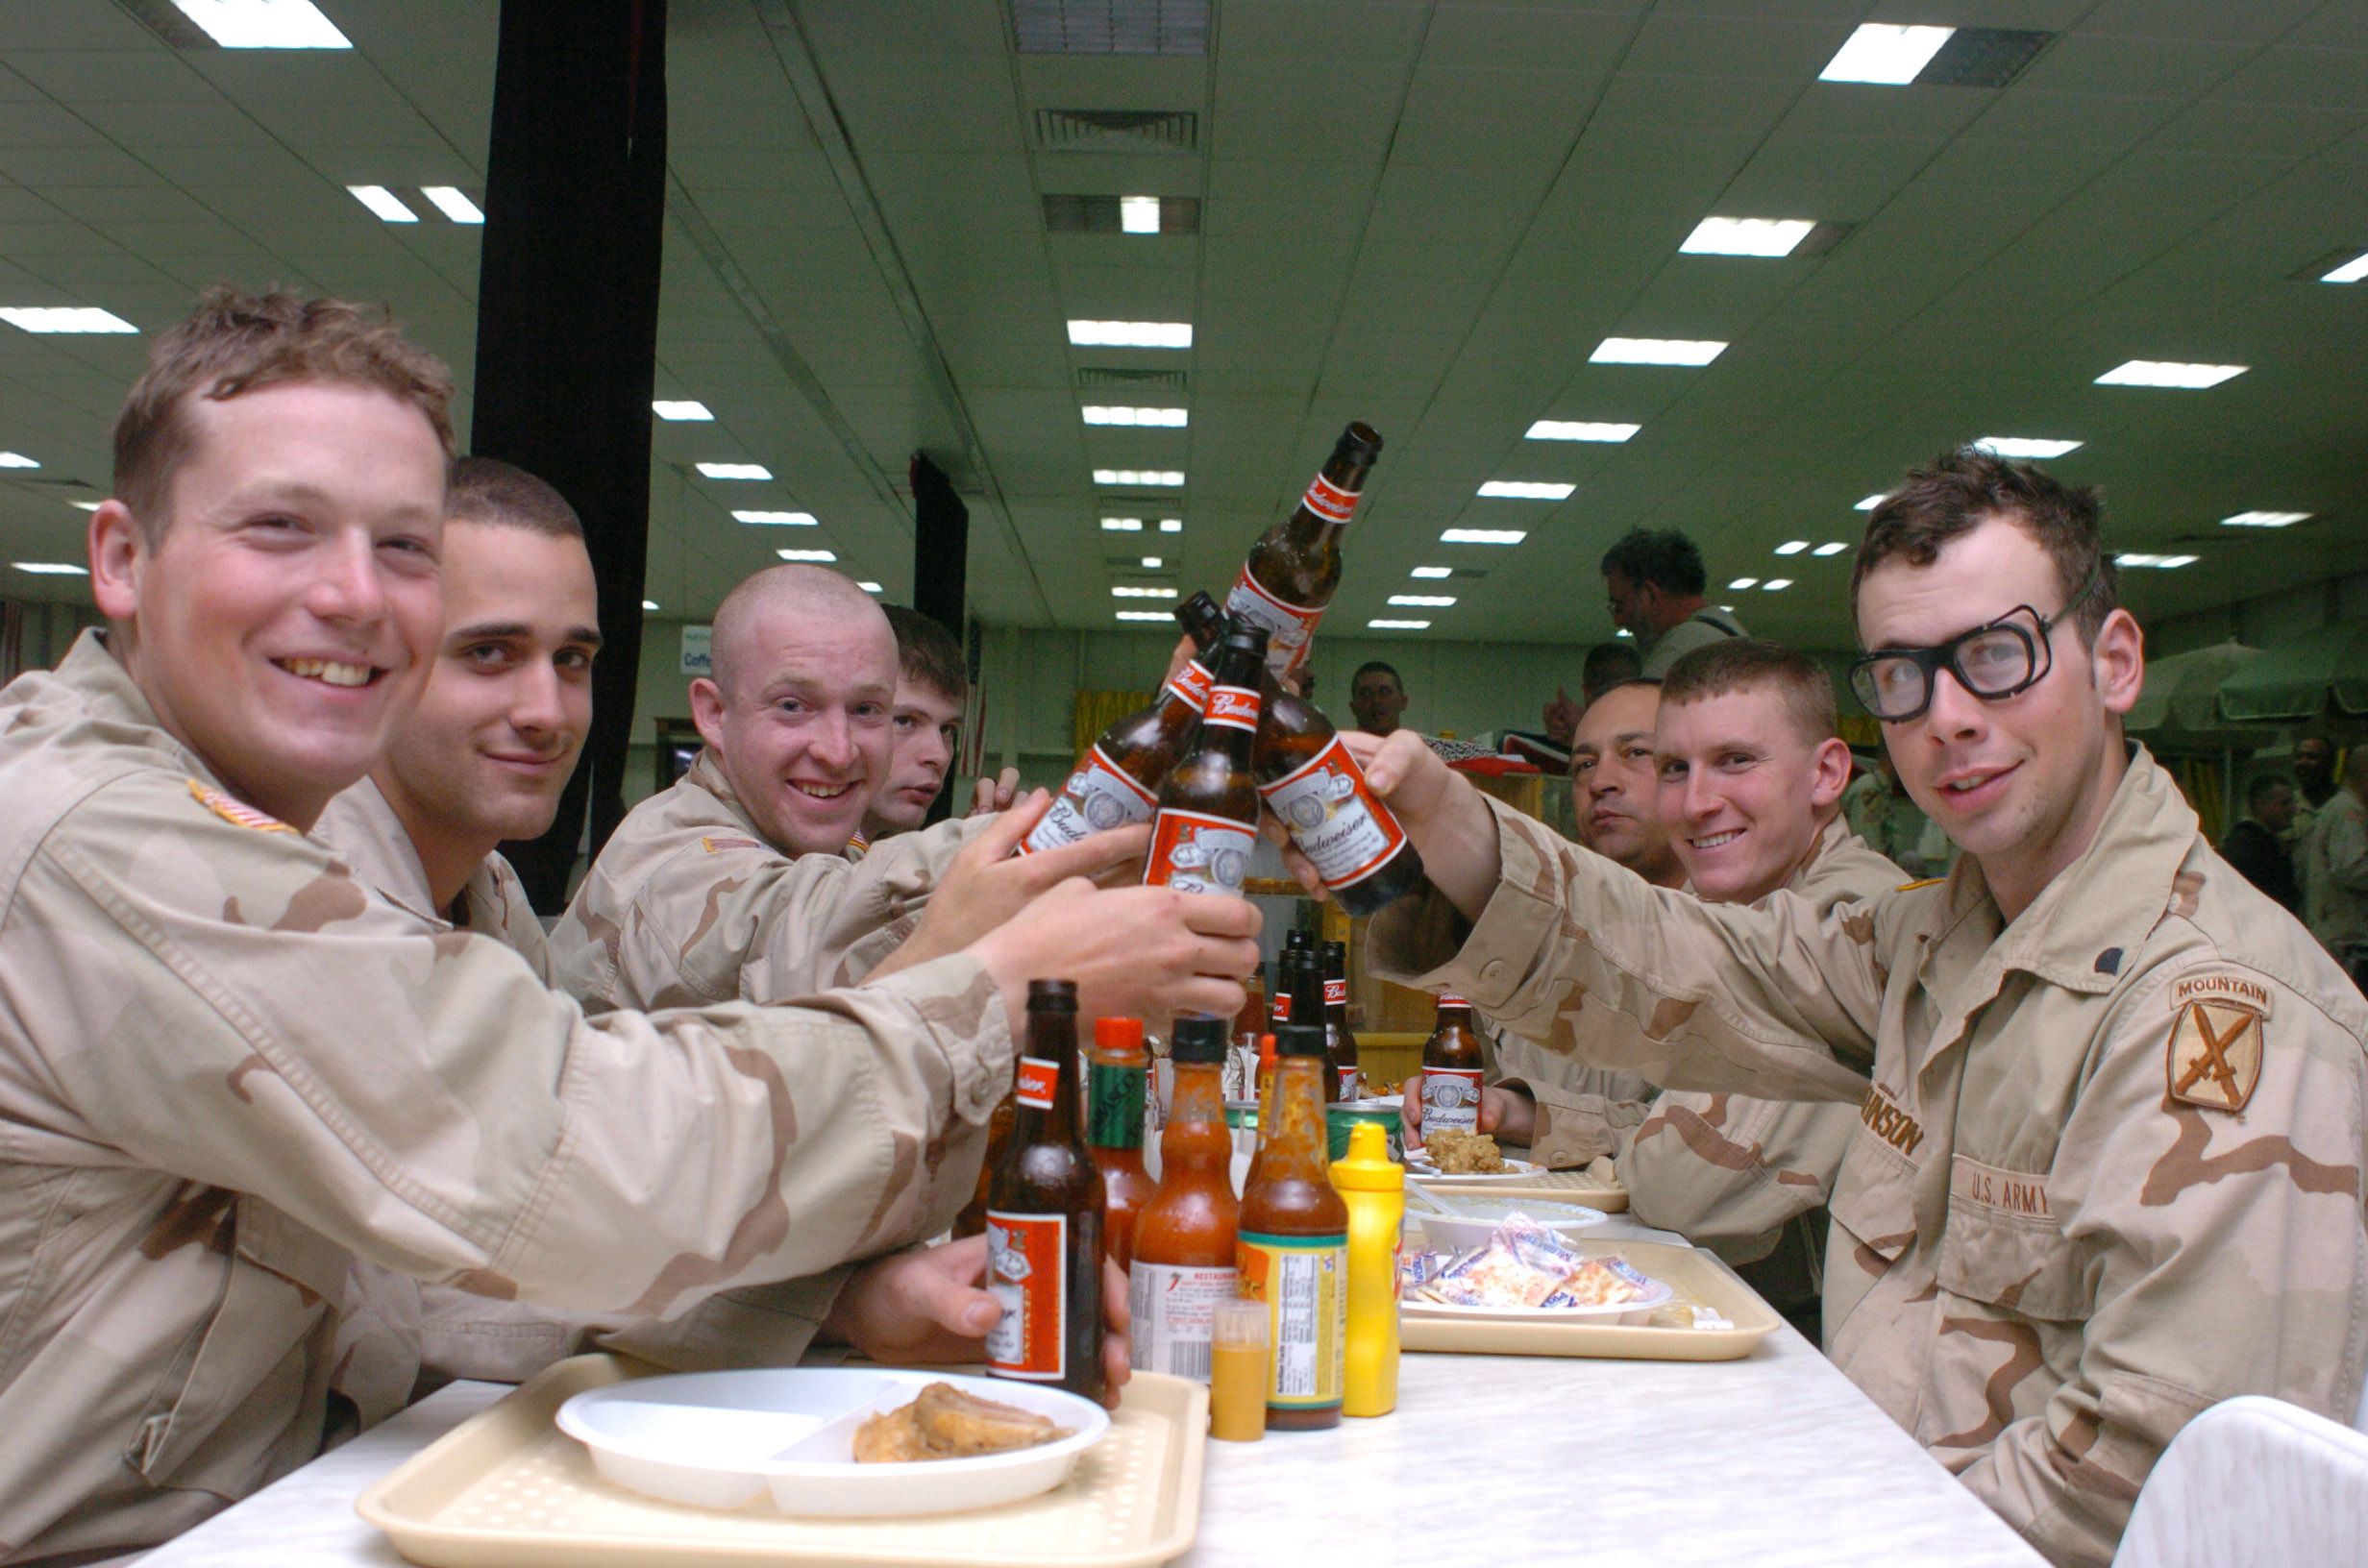 beer-in-the-barracks?-army-says-‘maybe’